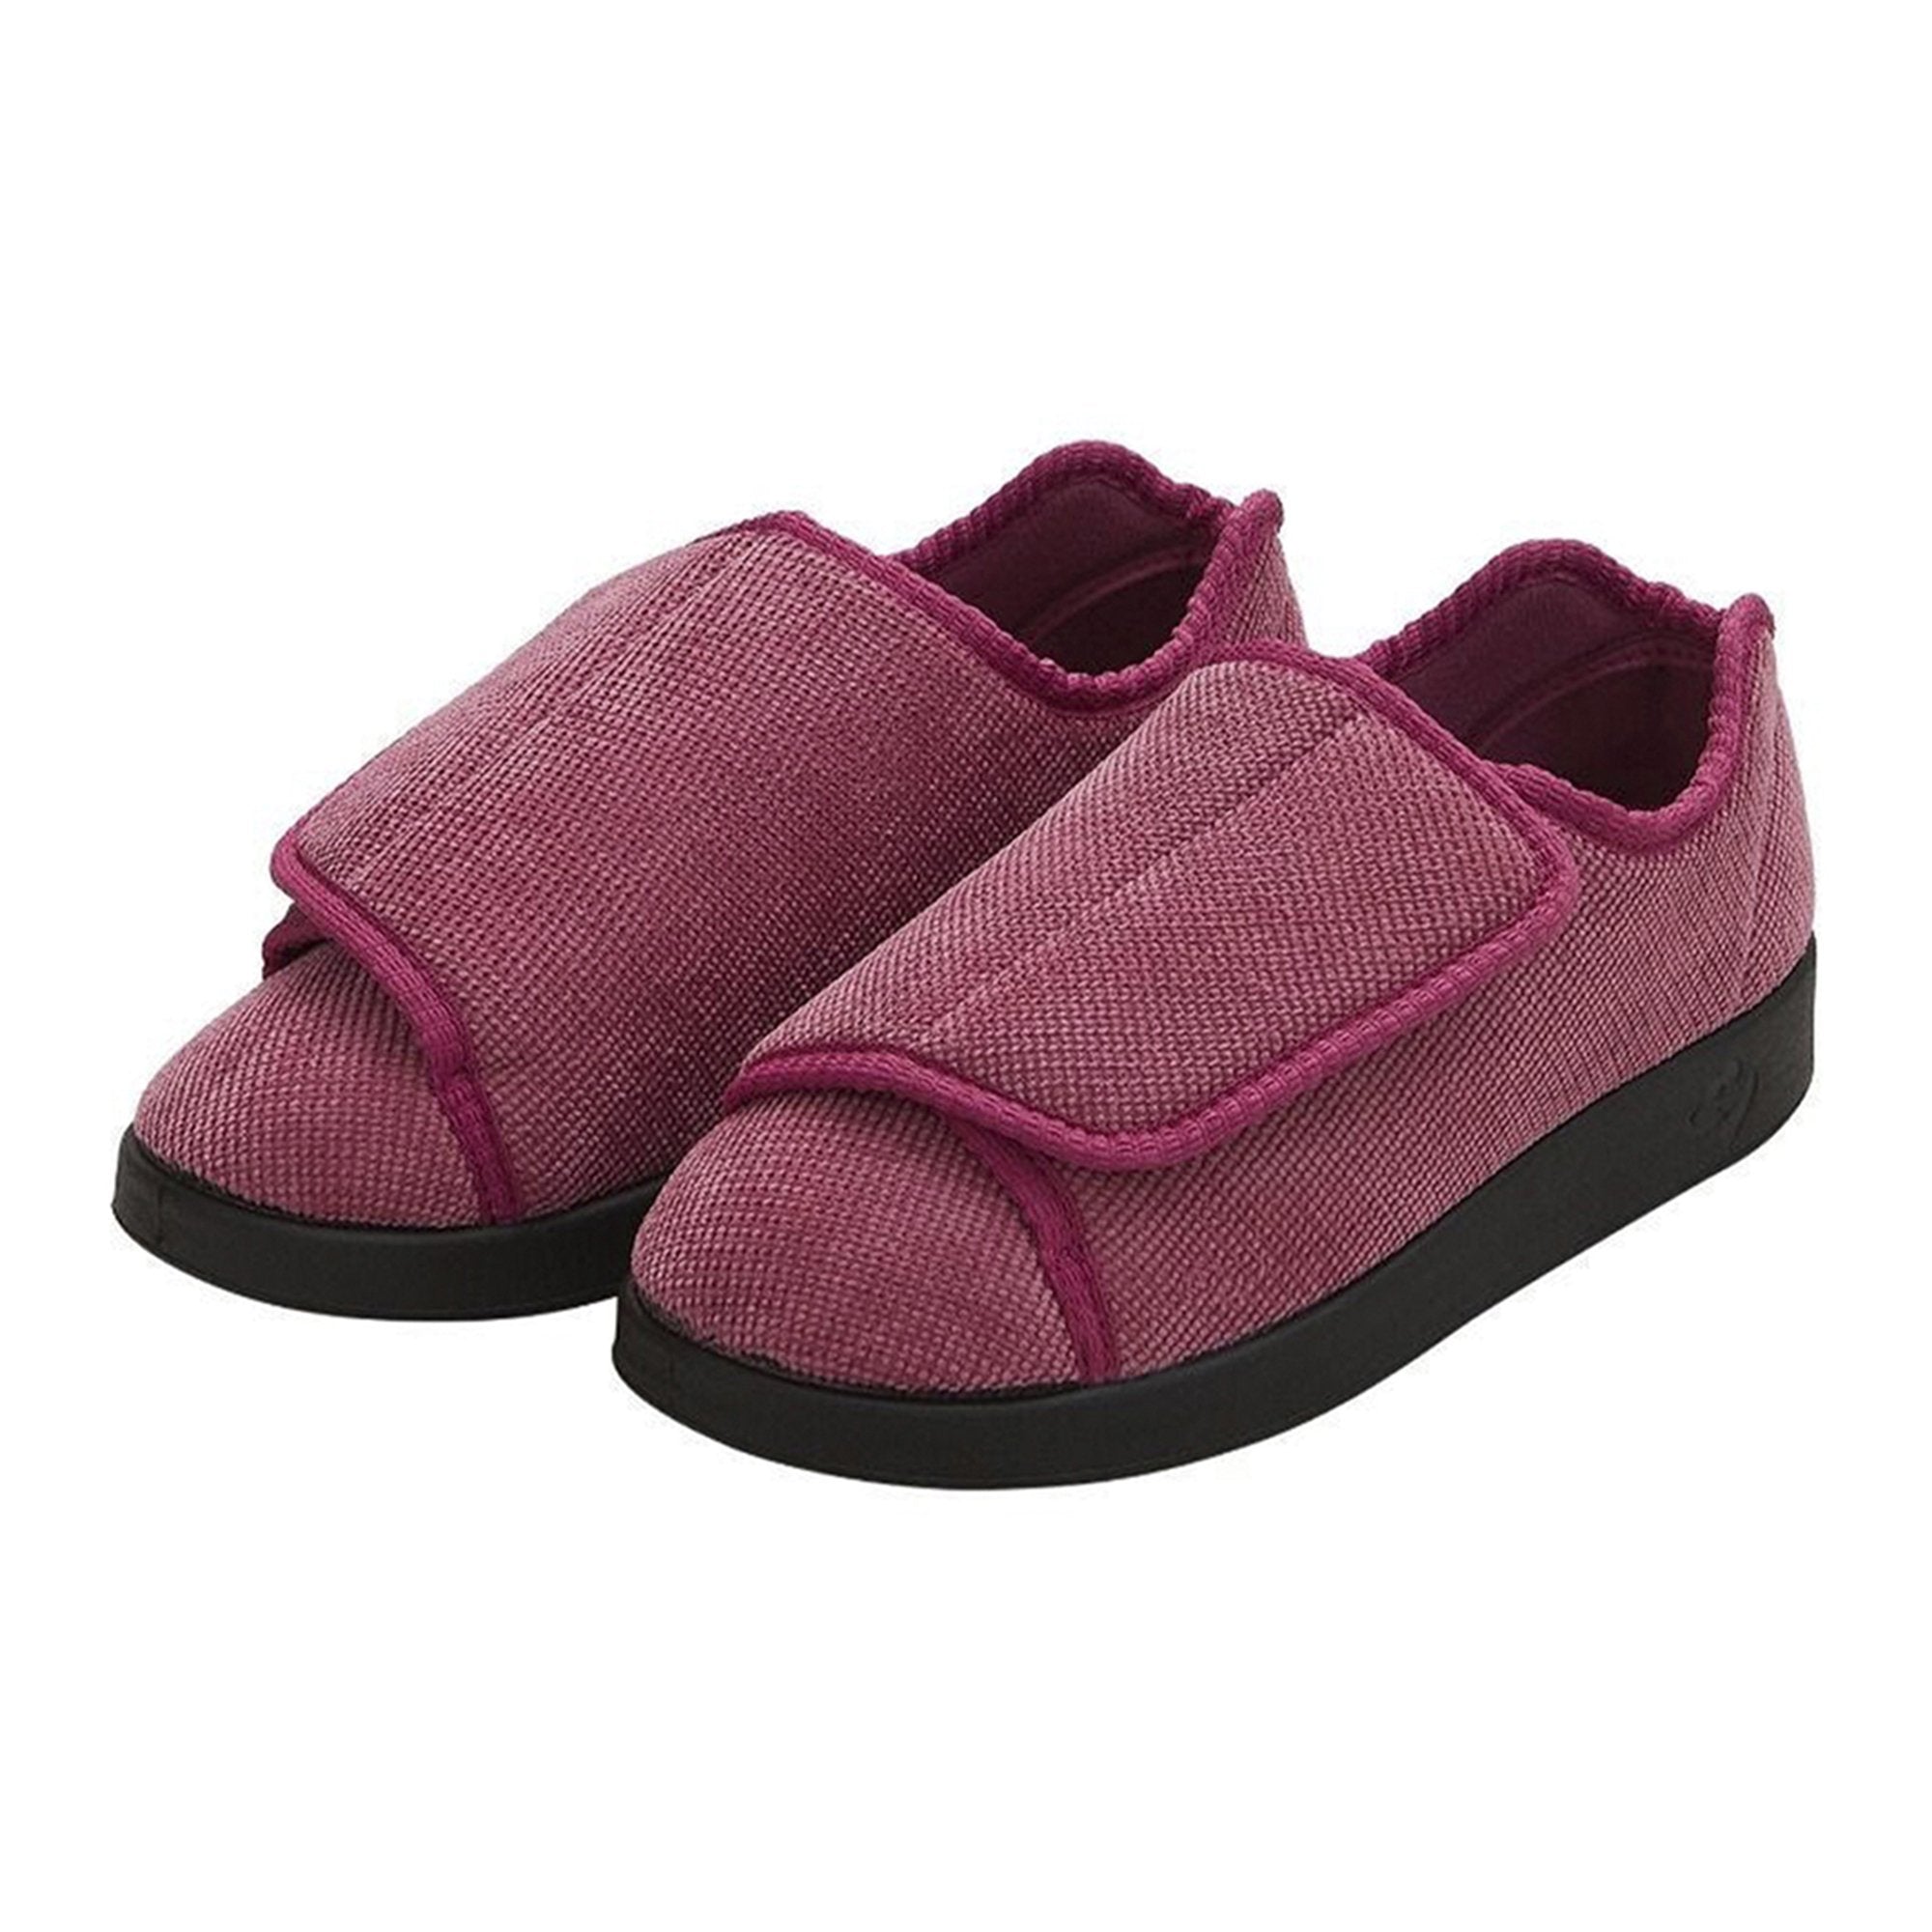 Slippers Silverts® Size 7 / 2X-Wide Dusty Rose Easy Closure